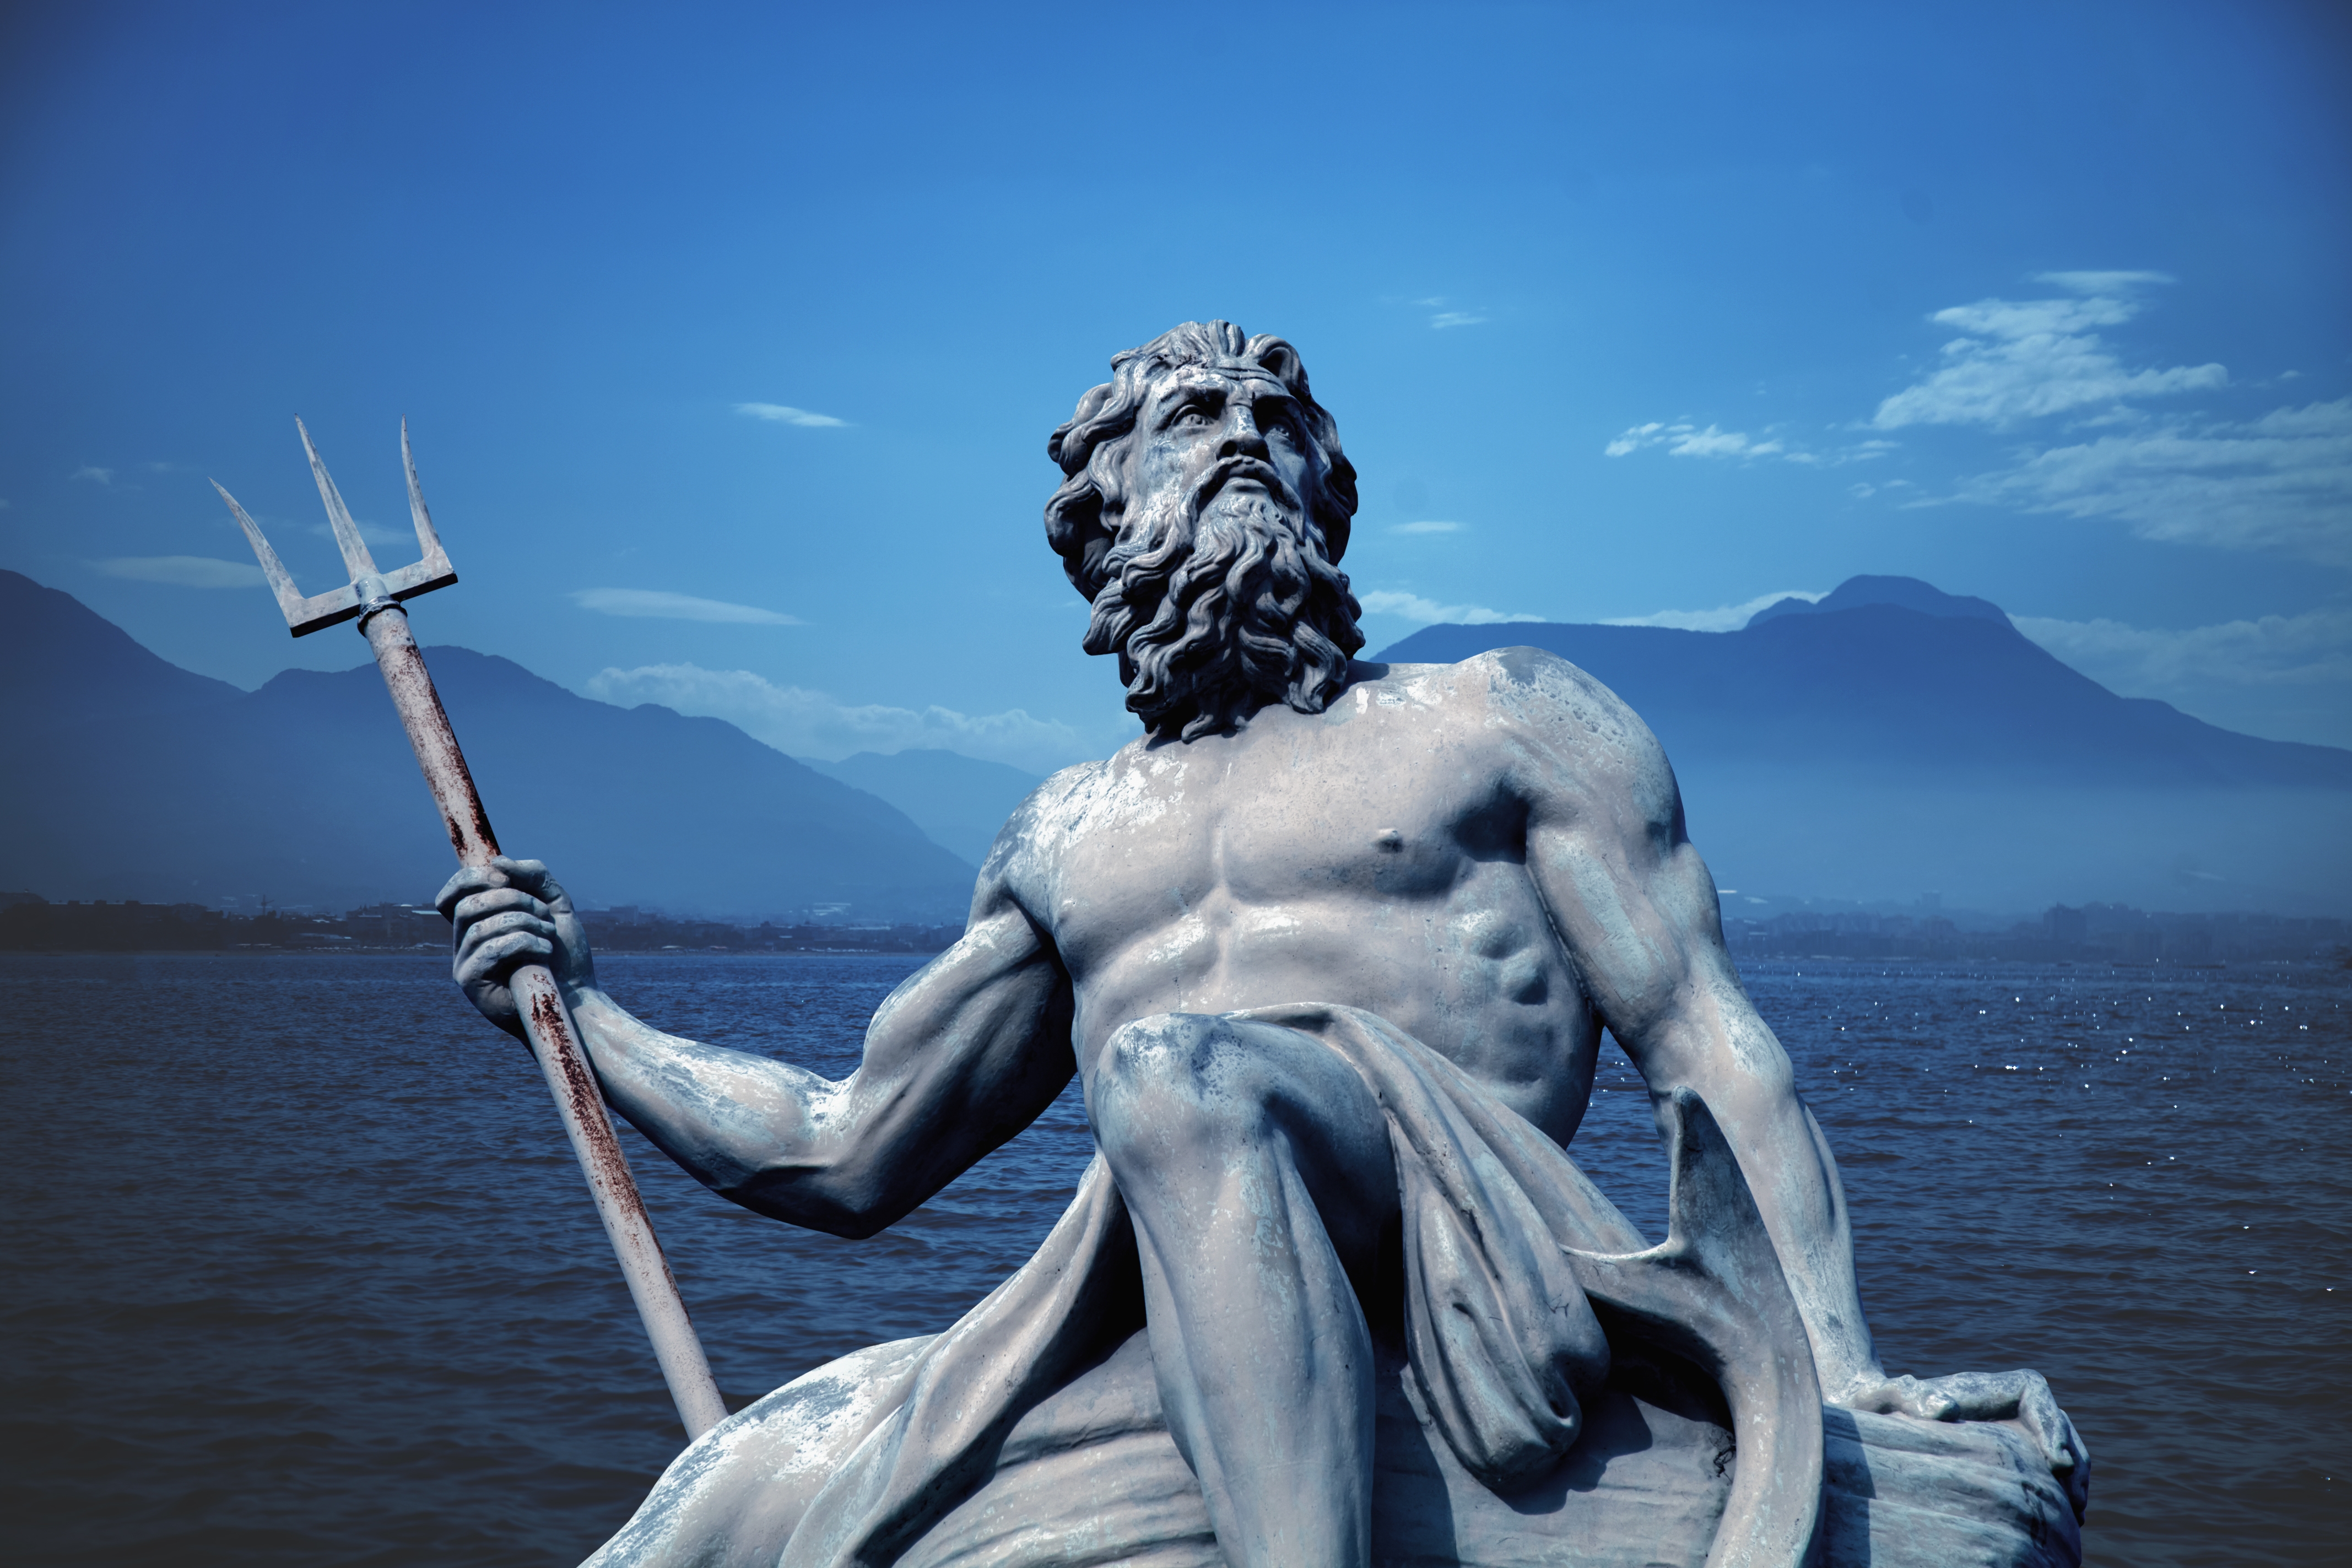 Poseidon with his trident in front of the sea